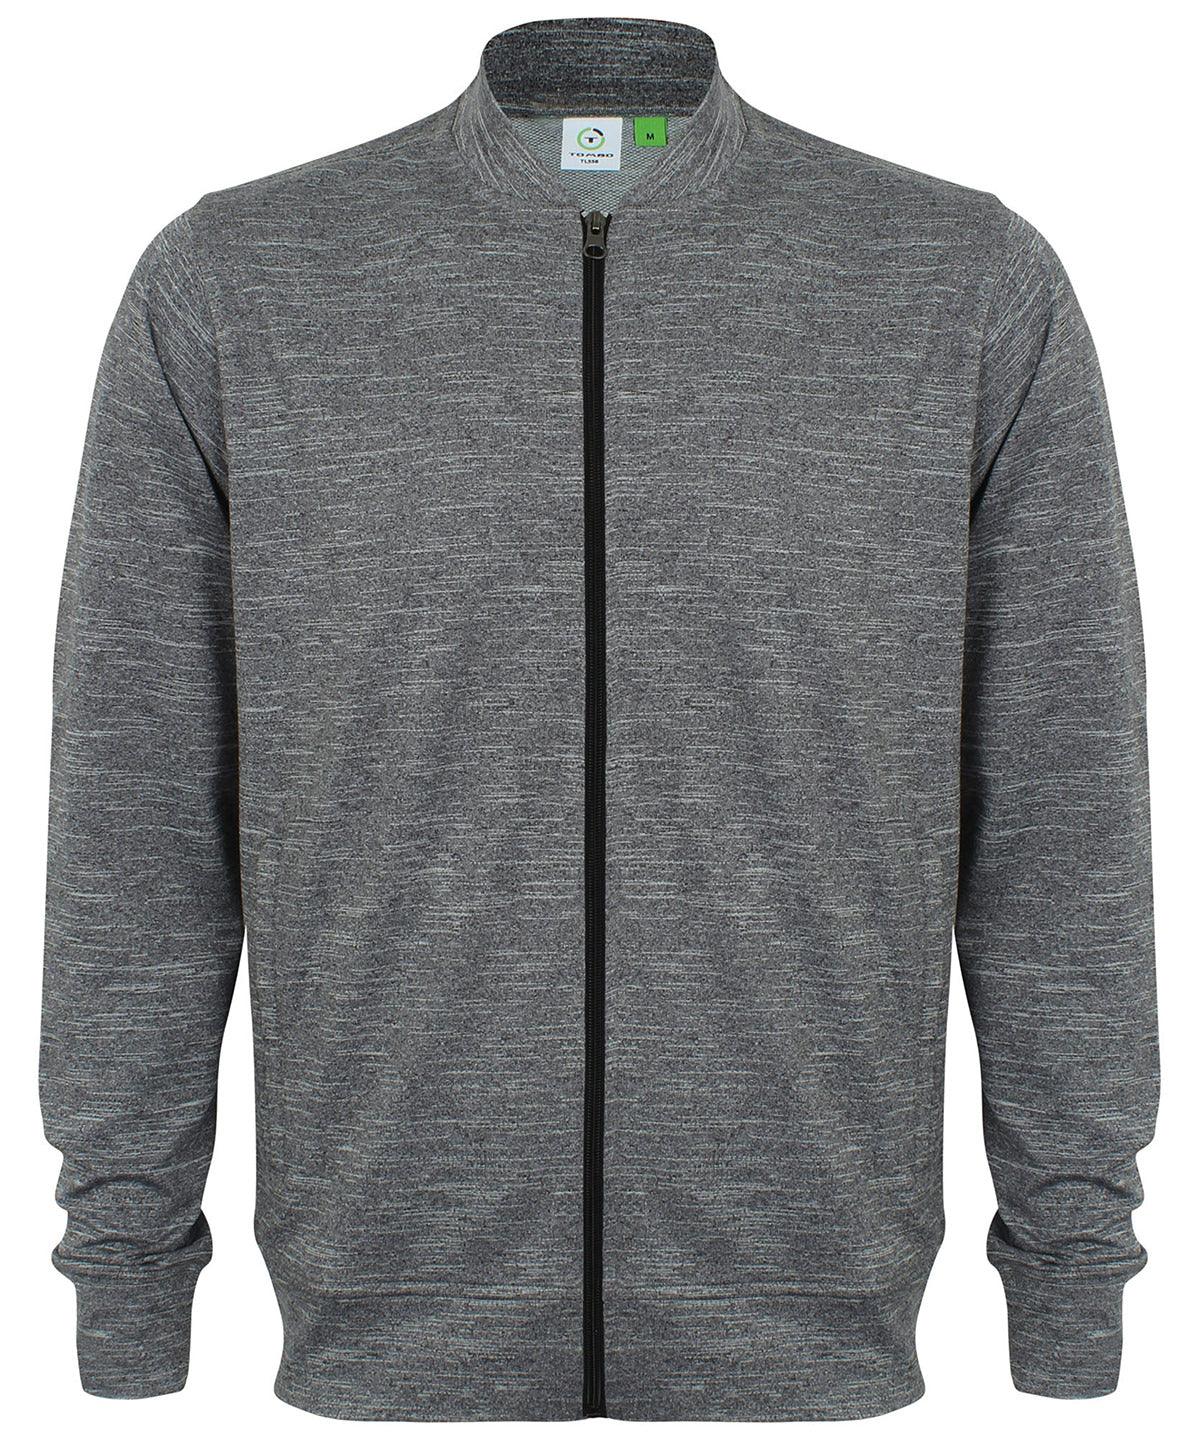 Grey Marl - Track top with baseball rib collar Tracksuits Tombo Athleisurewear, Lightweight layers, Rebrandable, Sports & Leisure Schoolwear Centres